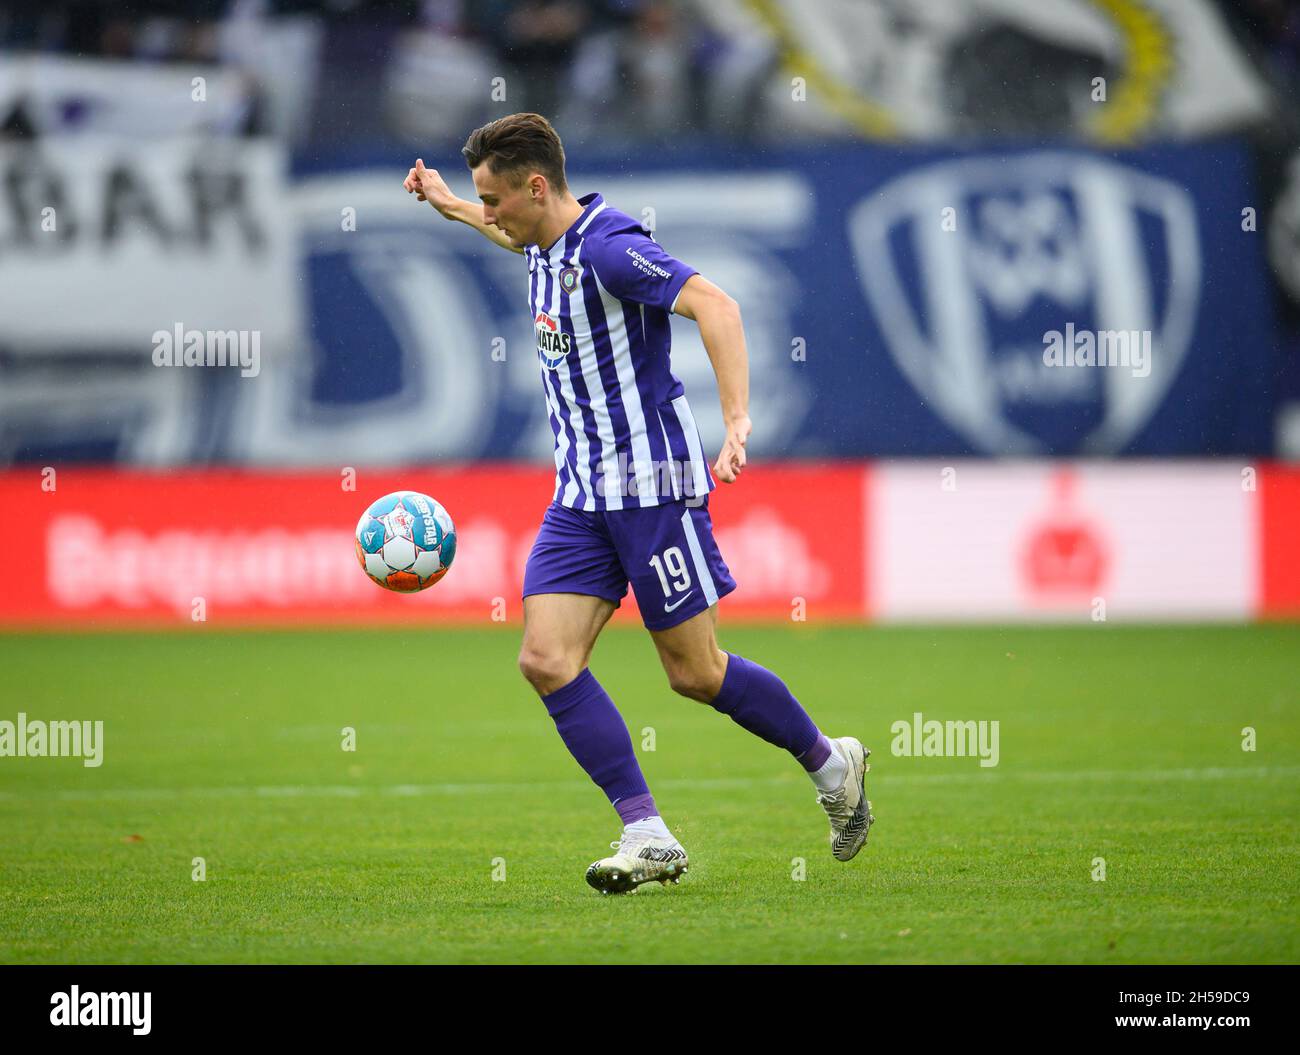 Aue, Germany. 07th Nov, 2021. Football: 2. Bundesliga, Erzgebirge Aue - 1. FC Heidenheim, Matchday 13, Erzgebirgsstadion. Aue's Omar Sijaric plays the ball. Credit: Robert Michael/dpa-Zentralbild/dpa - IMPORTANT NOTE: In accordance with the regulations of the DFL Deutsche Fußball Liga and/or the DFB Deutscher Fußball-Bund, it is prohibited to use or have used photographs taken in the stadium and/or of the match in the form of sequence pictures and/or video-like photo series./dpa/Alamy Live News Stock Photo